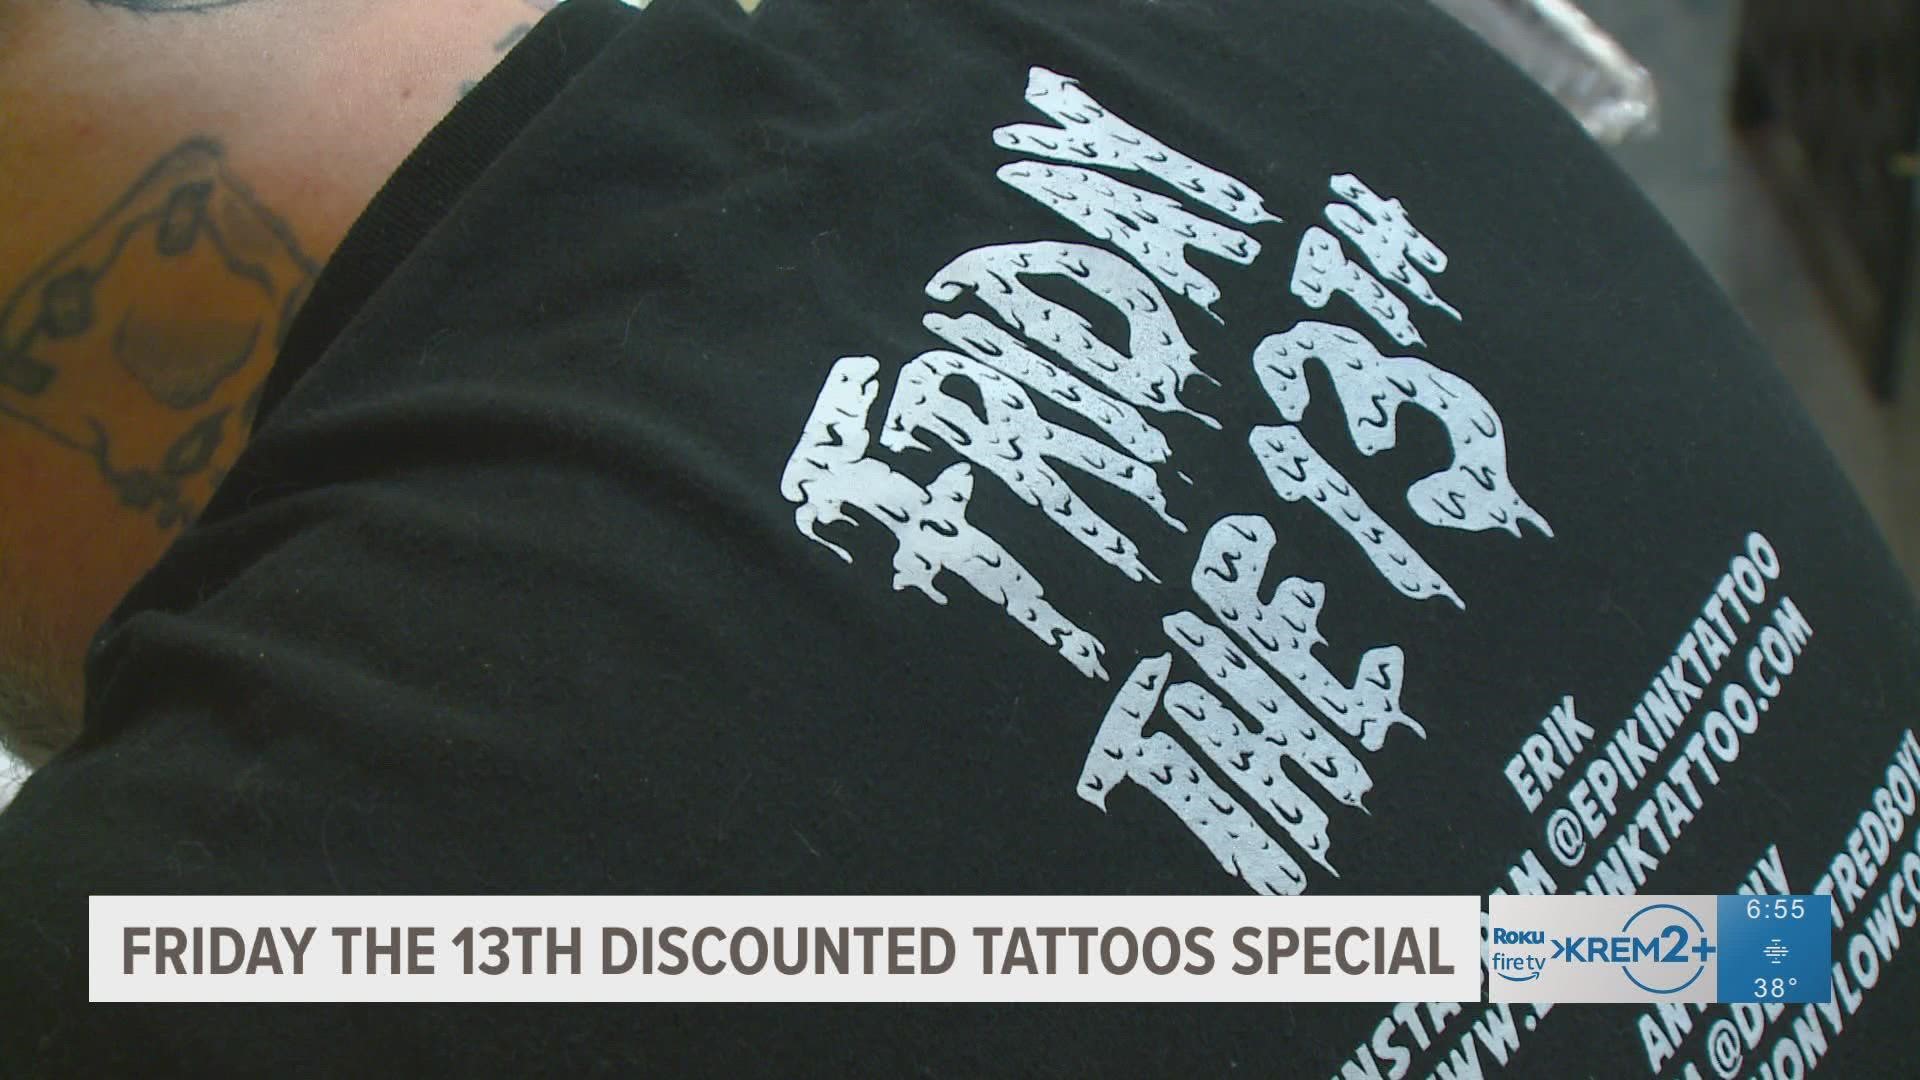 KREM 2 Photojournalist Dave Somers stopped by "All About It Tattoo" and "PNW Tattoo" to see what people are getting.